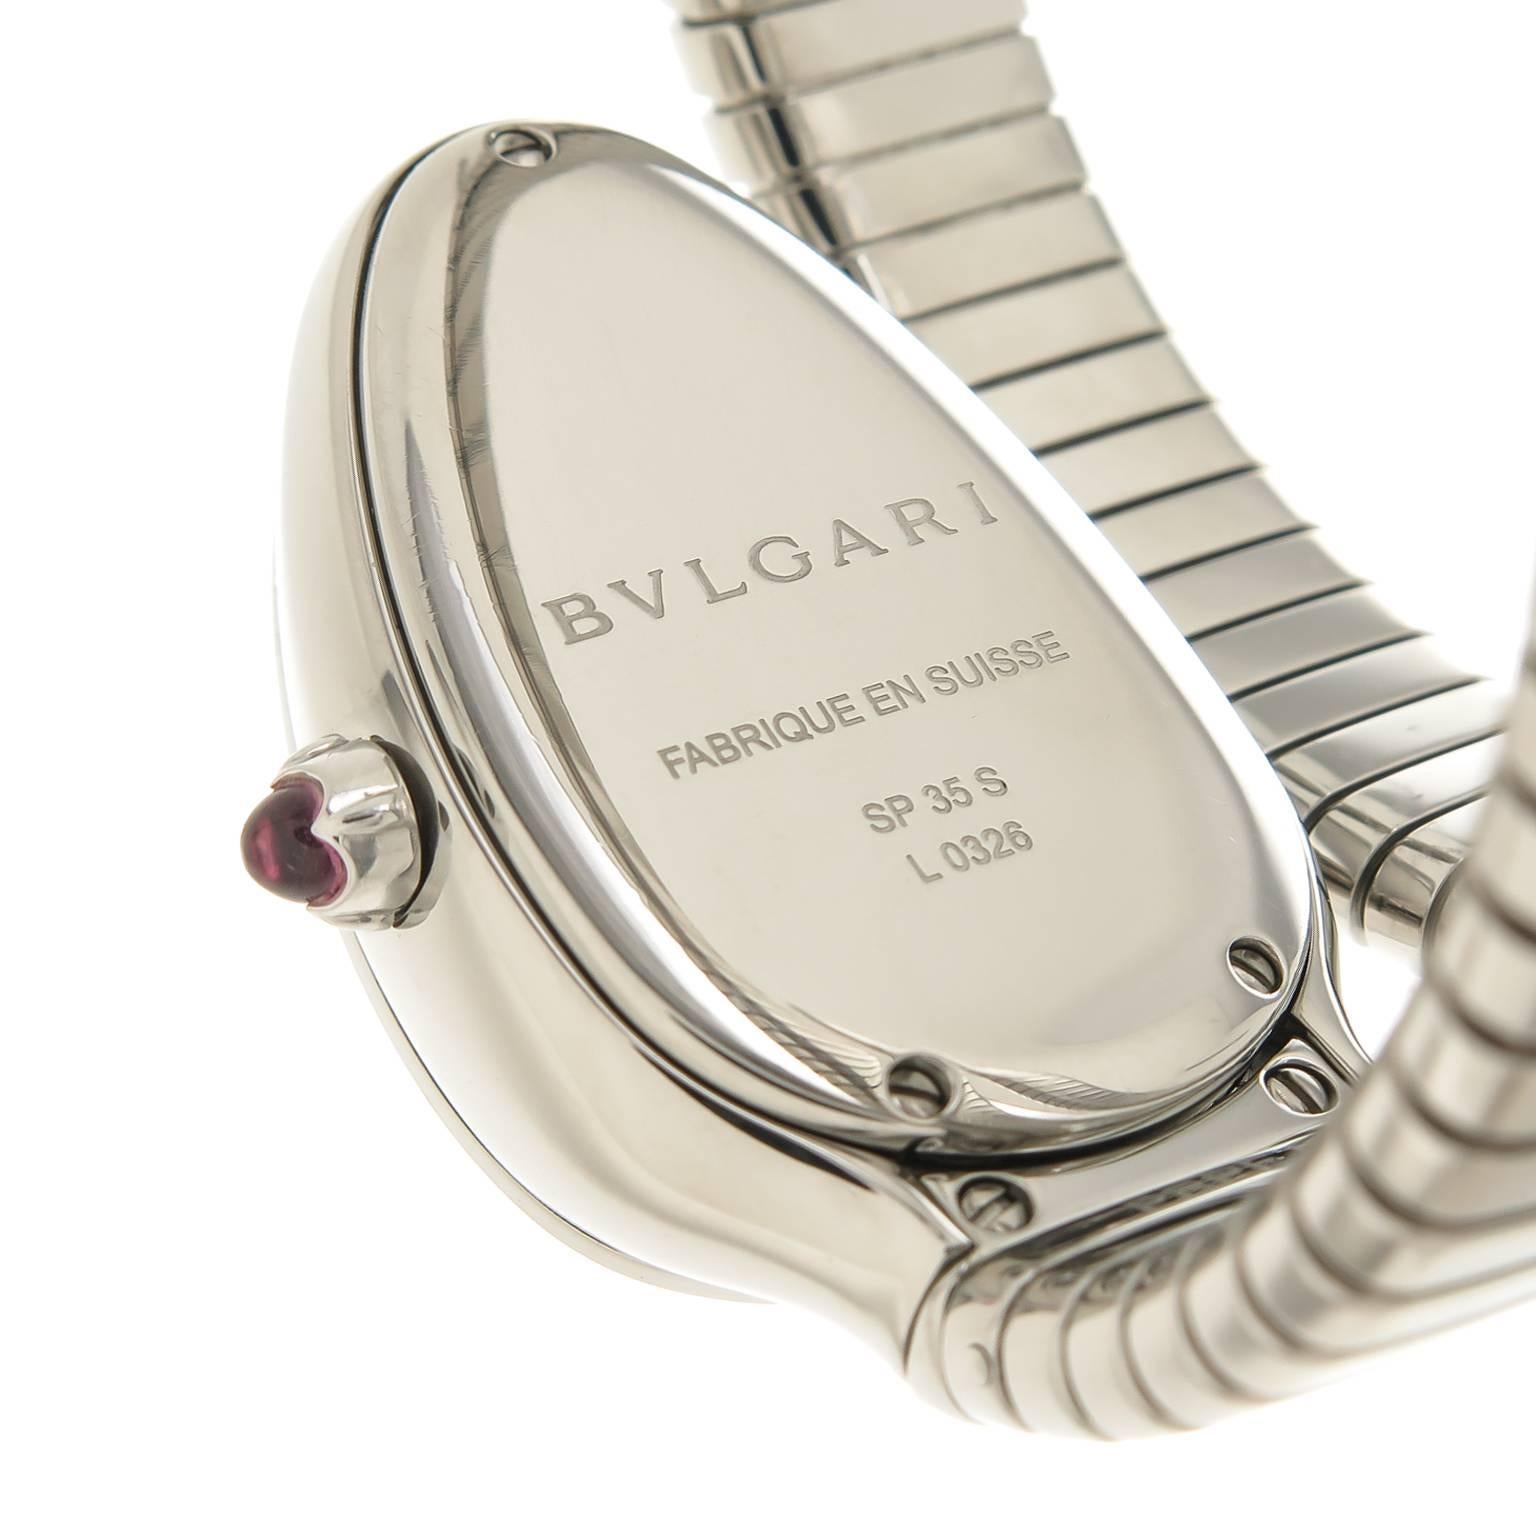 Circa 2014 Bulgari Serpenti collection Wrist Watch. Stainless Steel Tubogas flexible Bracelet. watch measures 35 MM and is 9 MM thick. Quartz movement, silver sunburst dial with raised Steel markers. Scratch resistant sapphire crystal and Pink